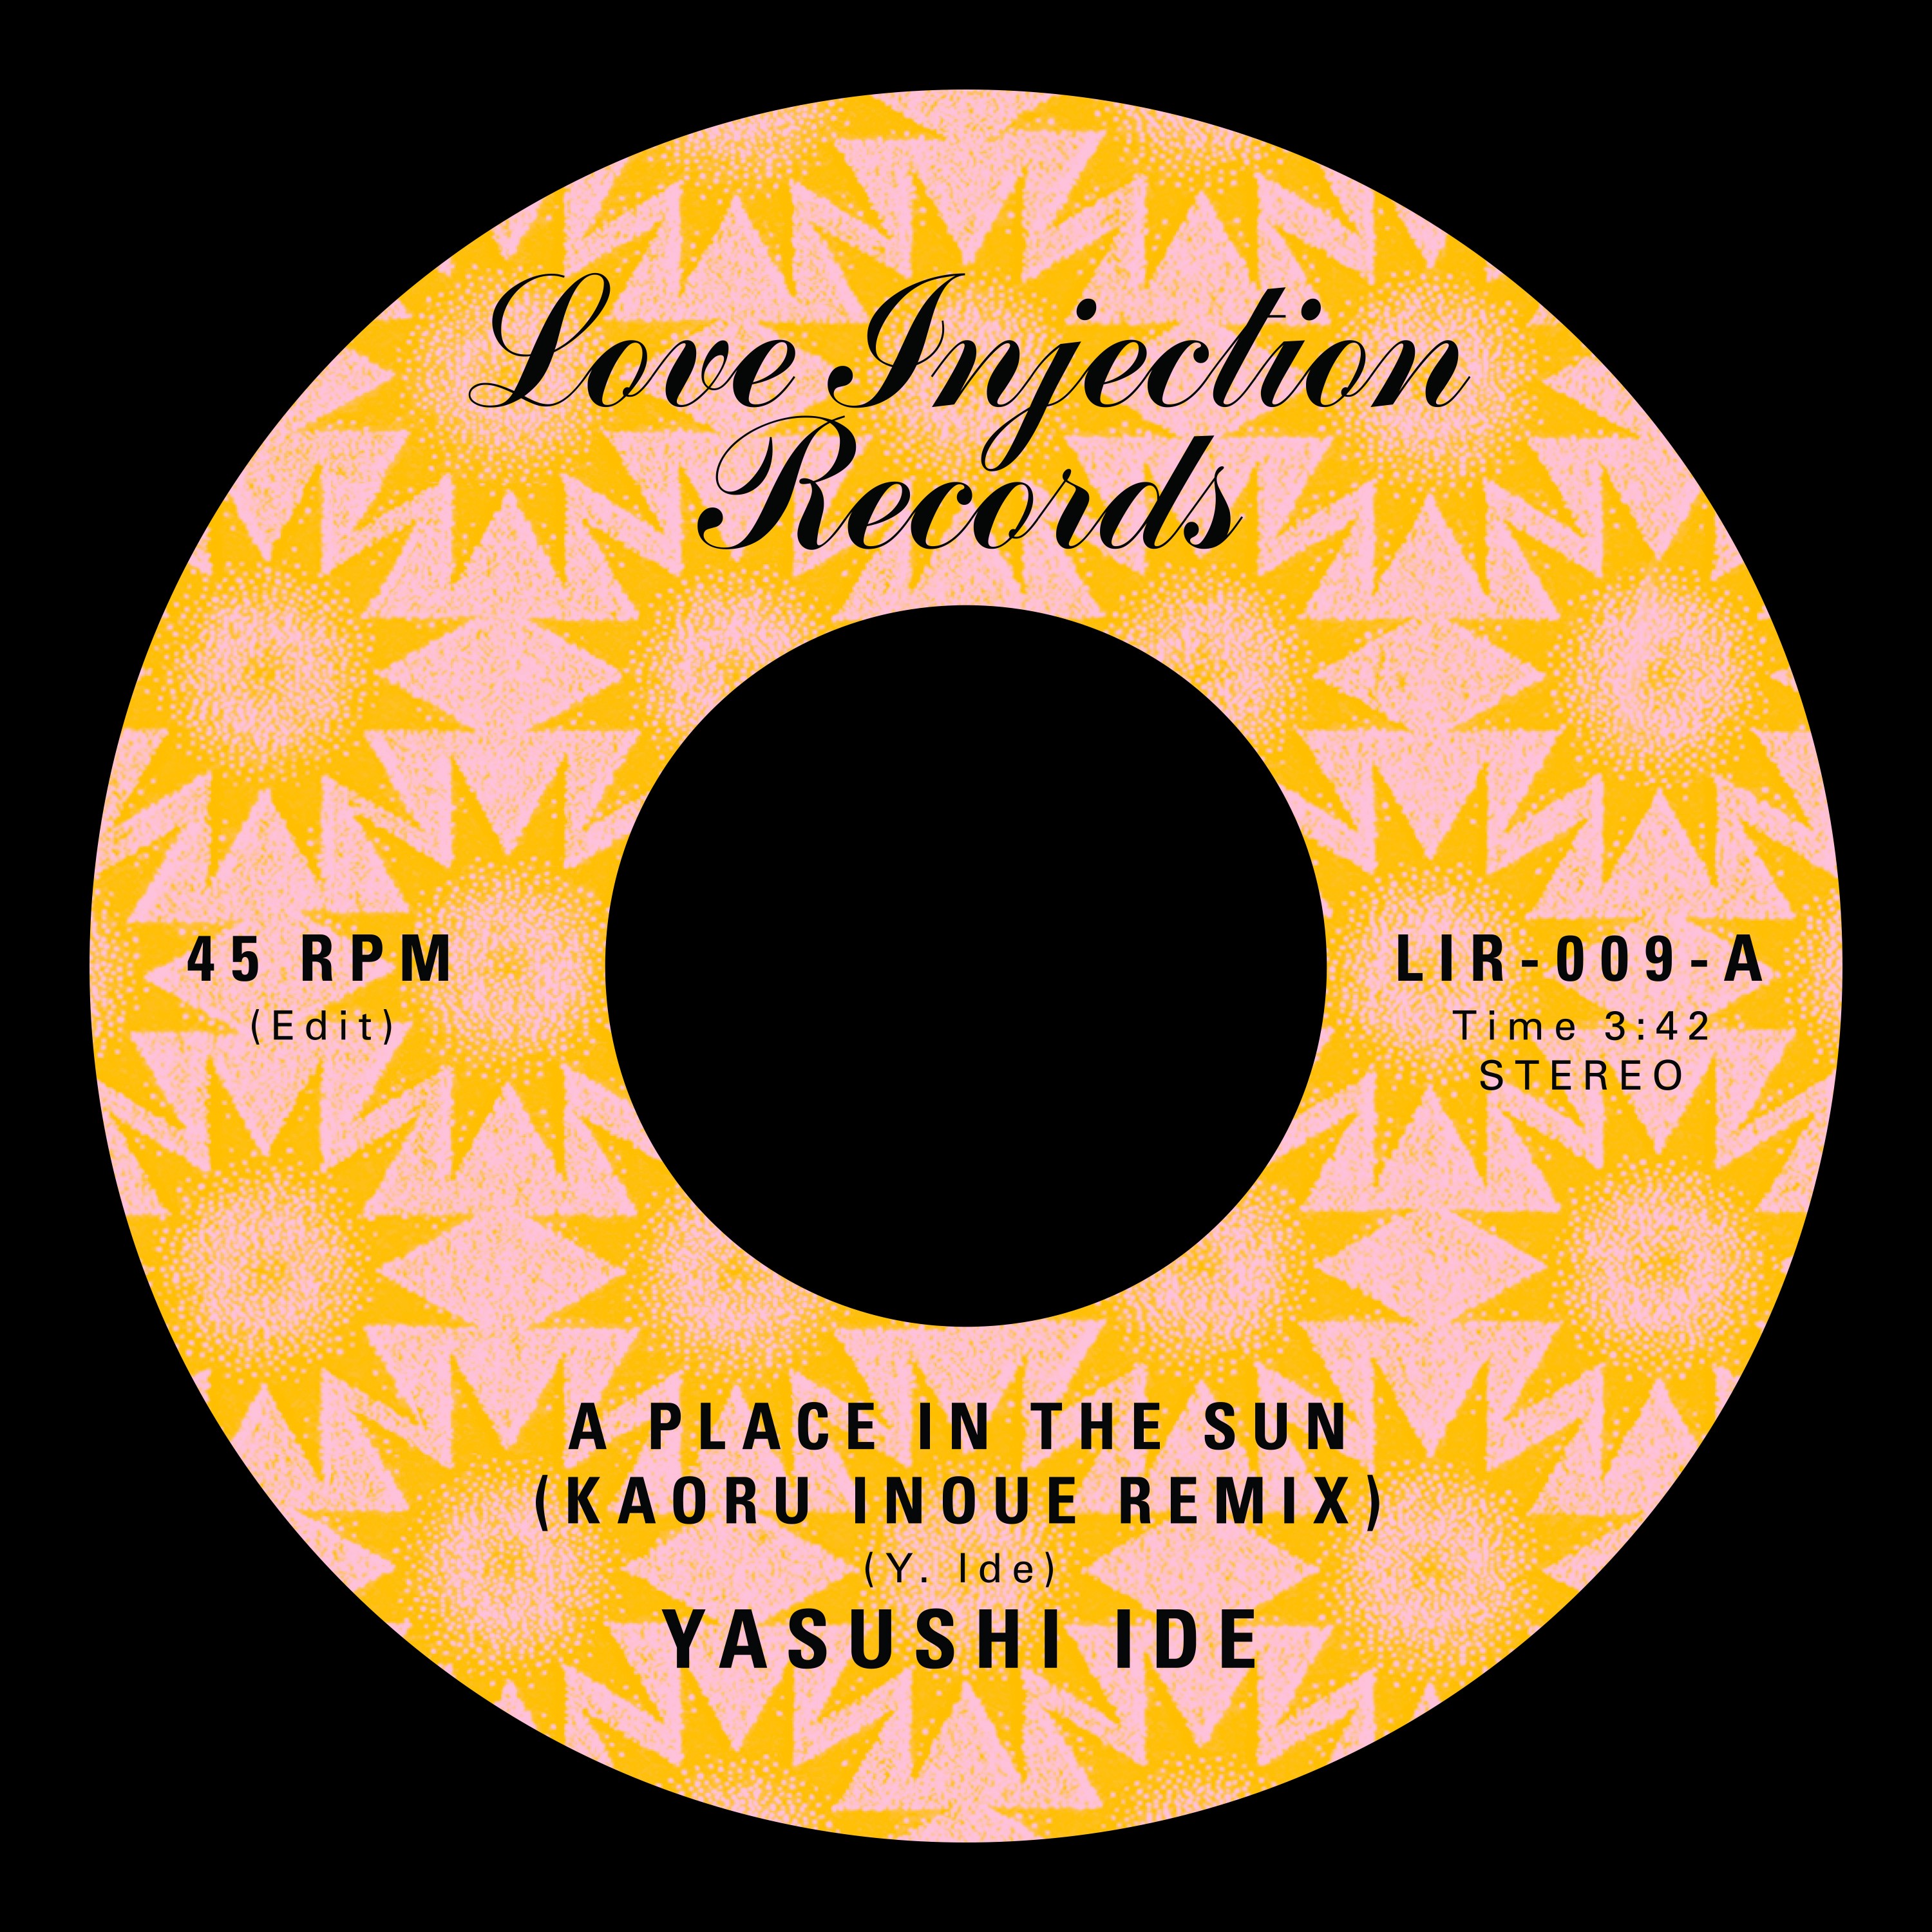 Yasushi Ide A Place In The Sun Kaoru Inoue Remix Love Injection Records